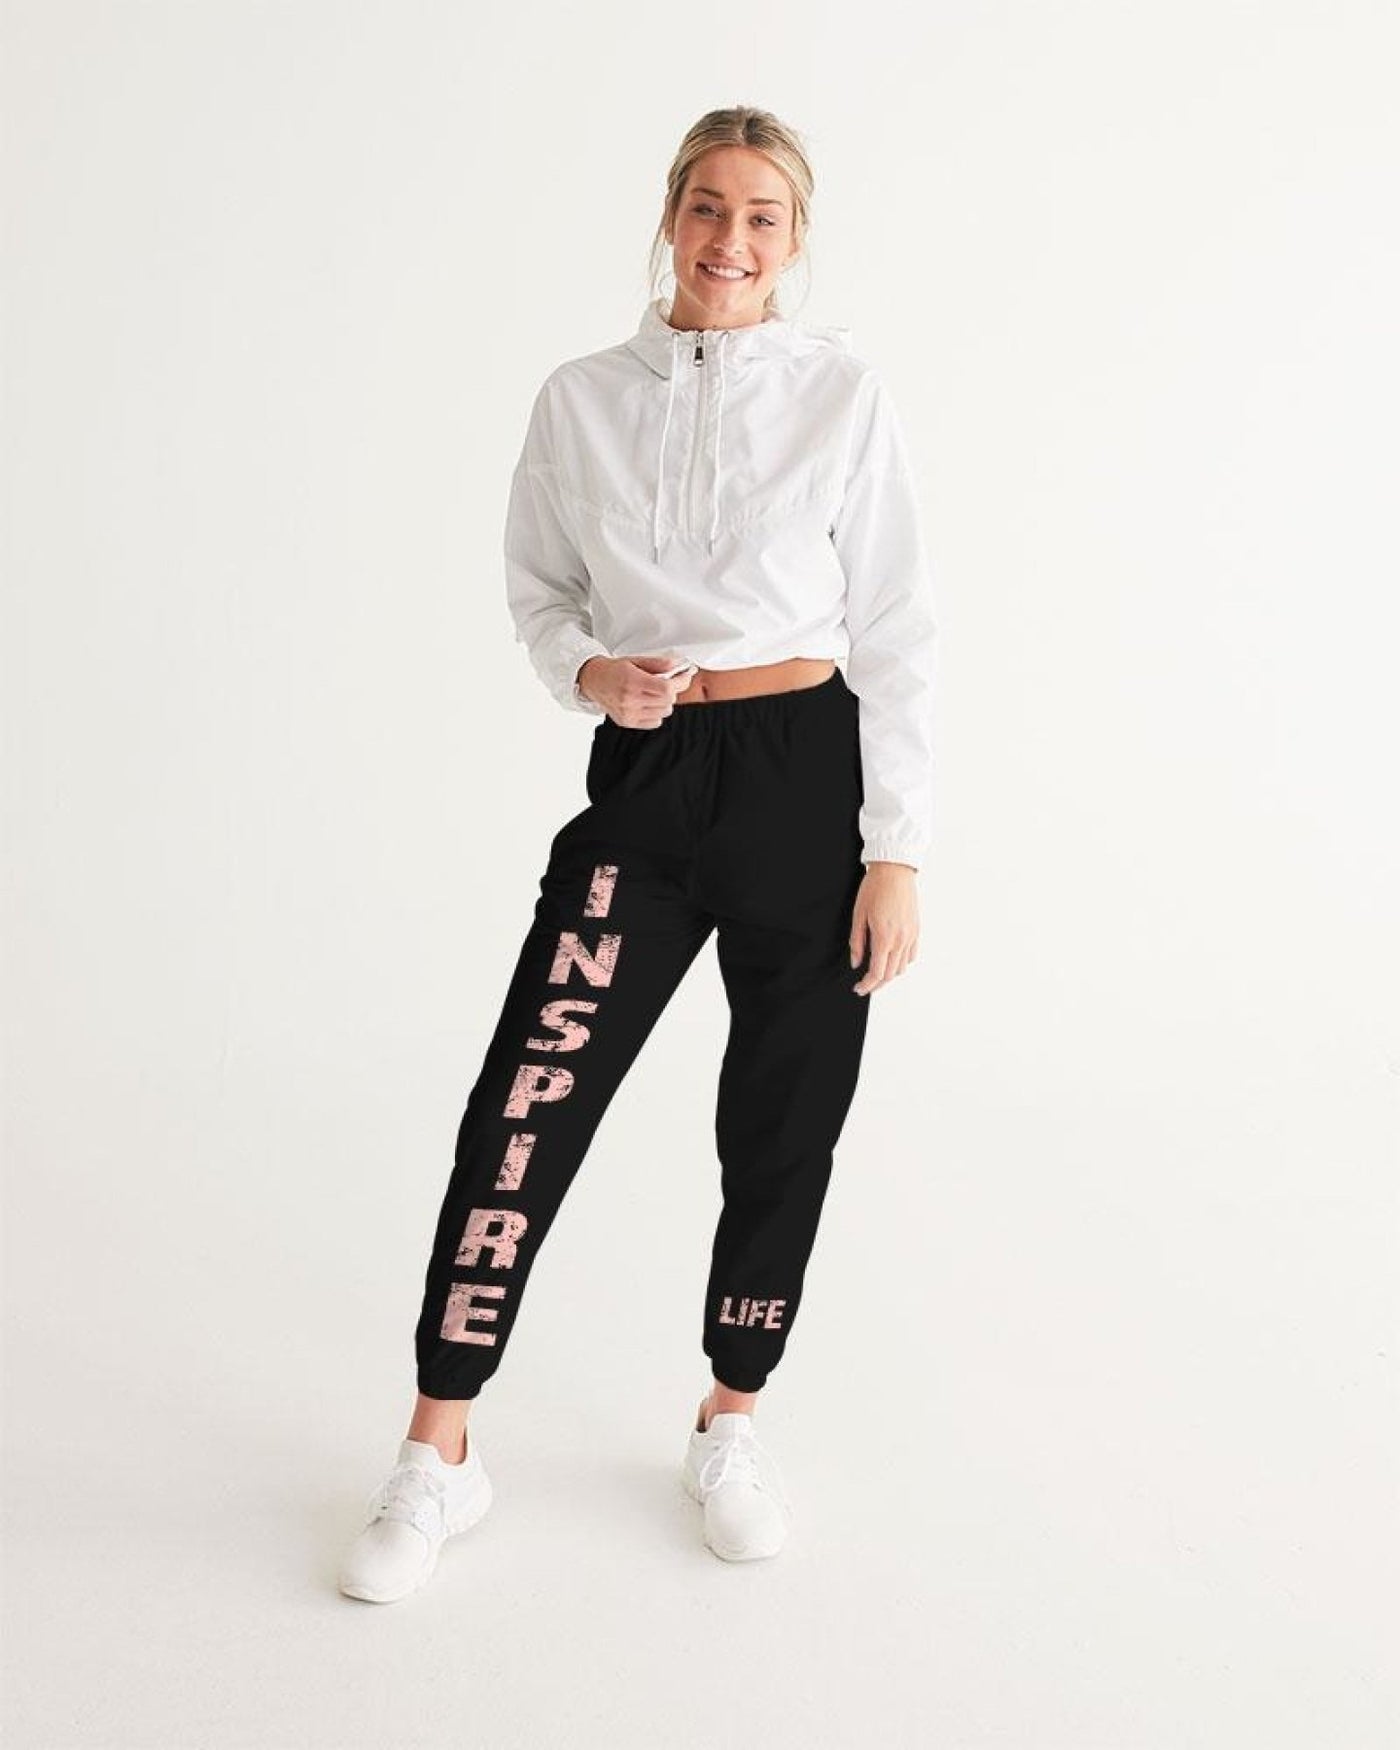 Womens Track Pants - Peach Inspire Graphic Sports Pants - Womens | Pants | Track